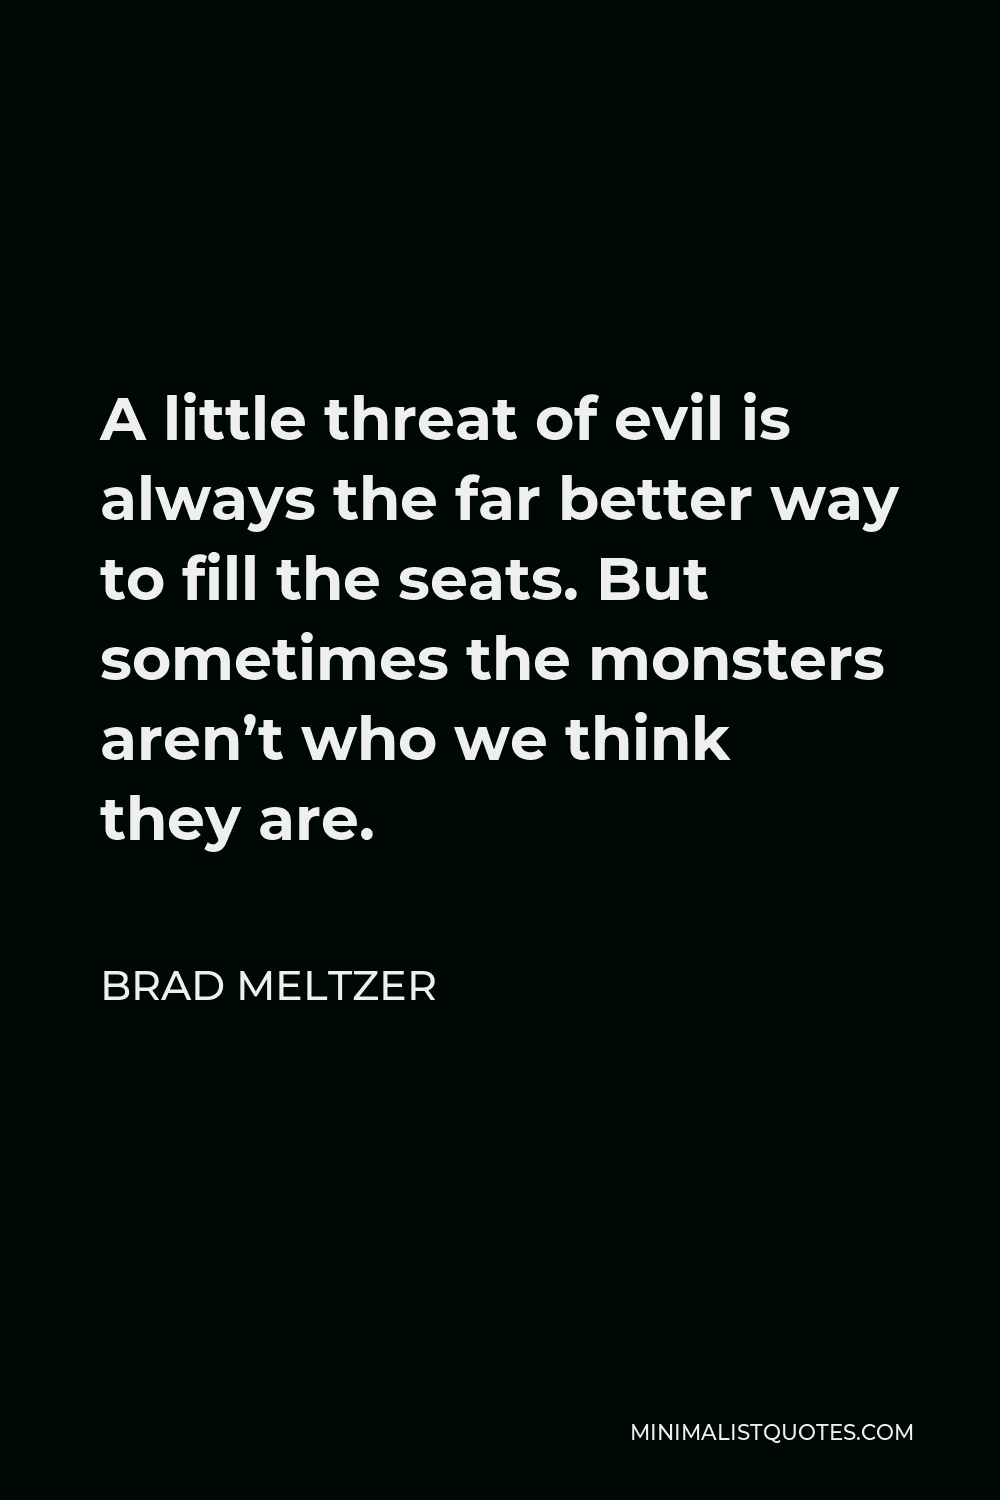 Brad Meltzer Quote - A little threat of evil is always the far better way to fill the seats. But sometimes the monsters aren’t who we think they are.